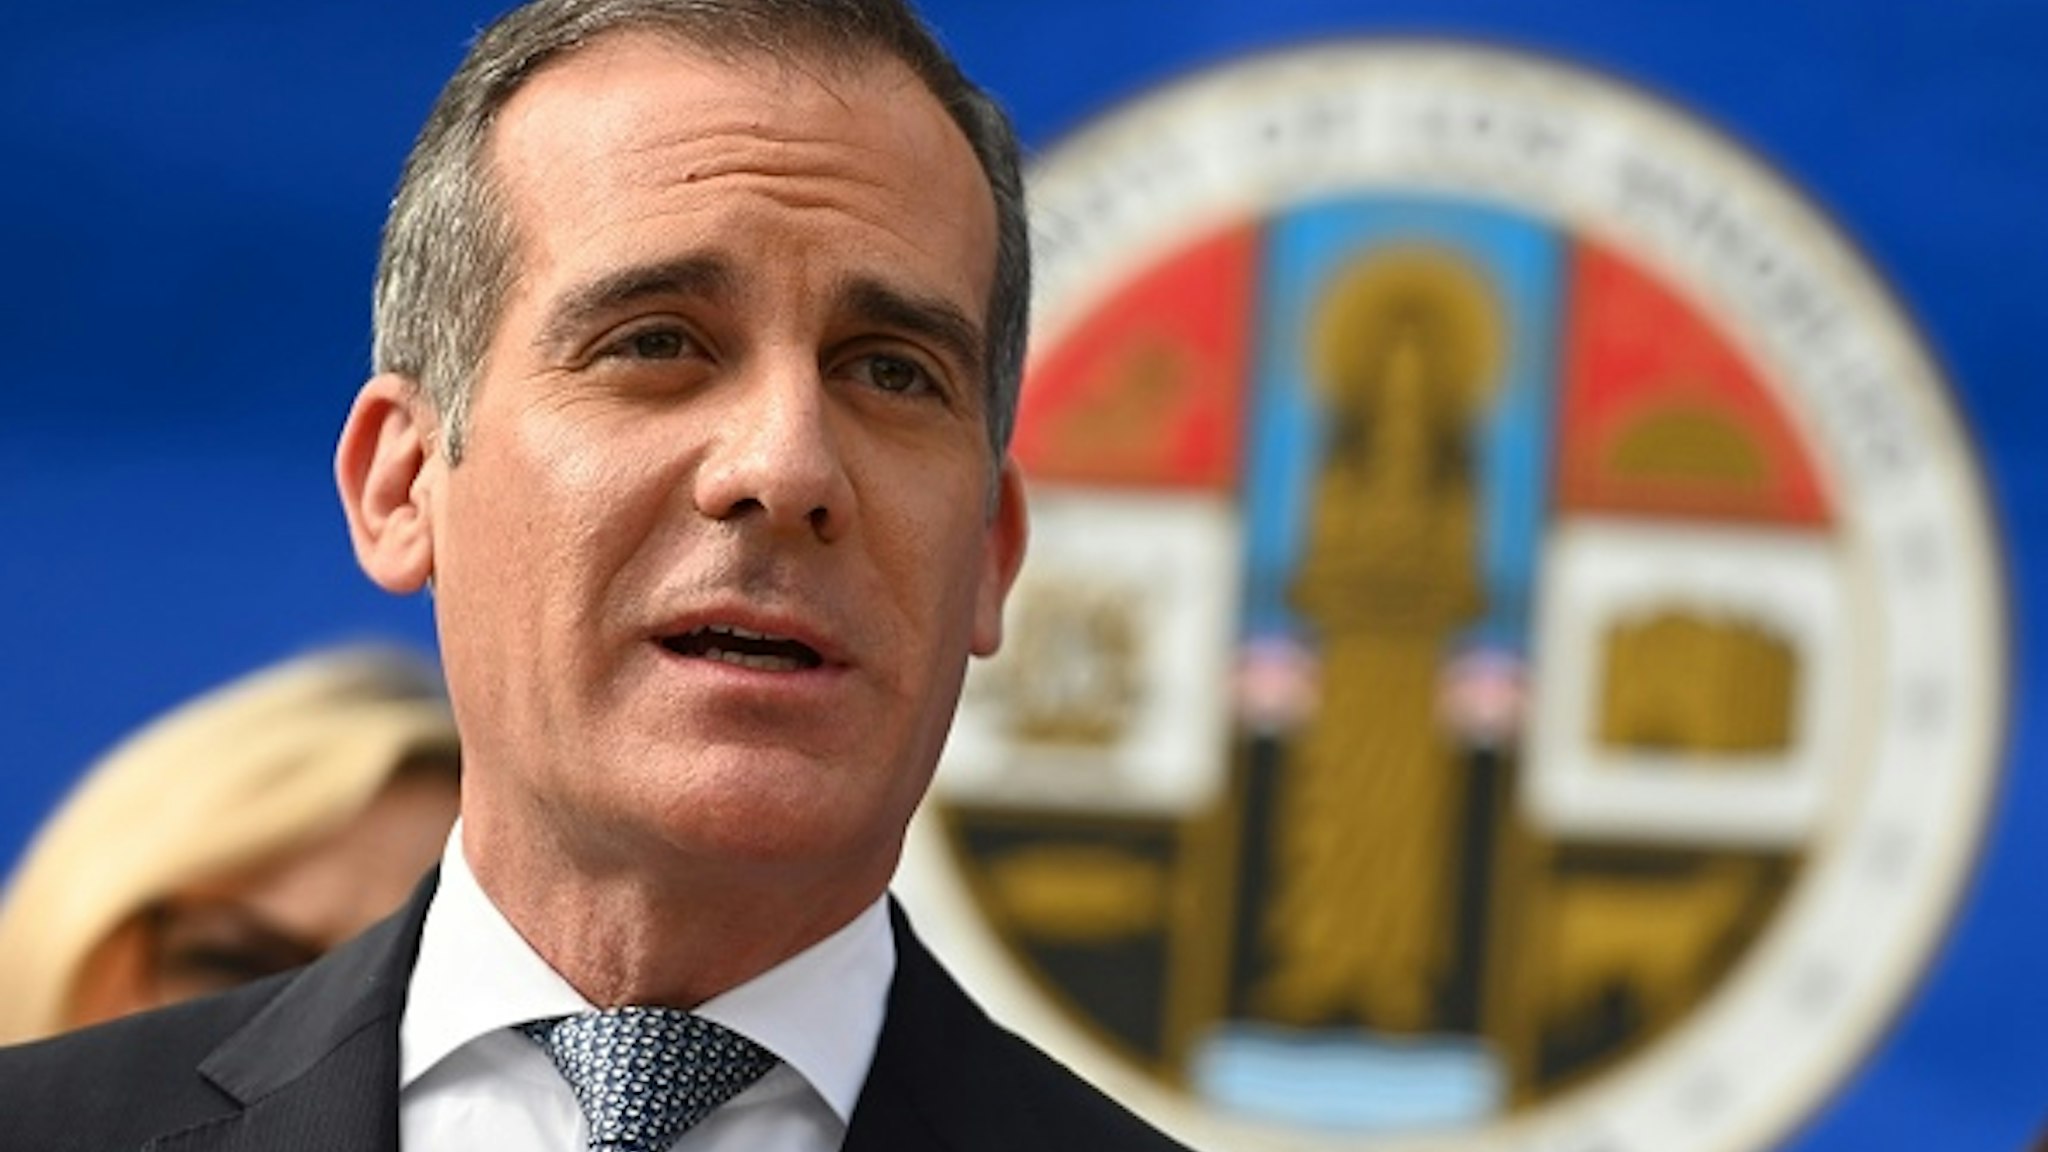 Los Angeles Mayor Eric Garcetti speaks at a Los Angeles County Health Department press conference on the novel coronavirus, (COVID-19)on March 4, 2020 in Los Angeles, California. - Stressing that they were acting out of "an abundance of caution" Los Angeles County officials today declared a state of emergency for the novel coronavirus, as six new cases of the disease were revealed in the county in the last 48 hours.